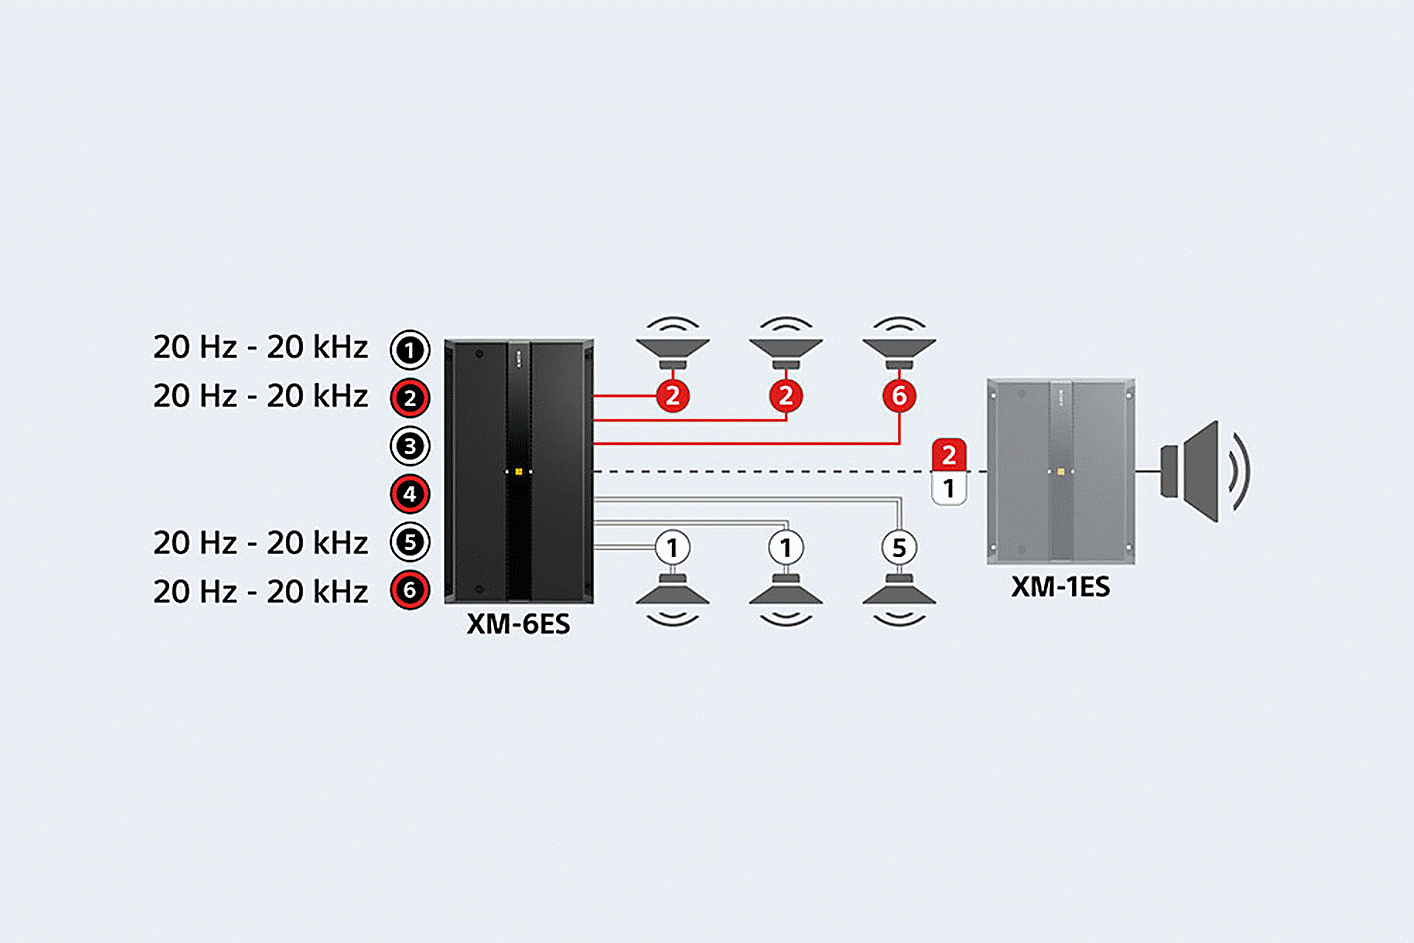 Diagram of the XM-6ES connected to six speakers and a XM-1ES, sound settings are displayed next to ports 1, 2, 5 & 6